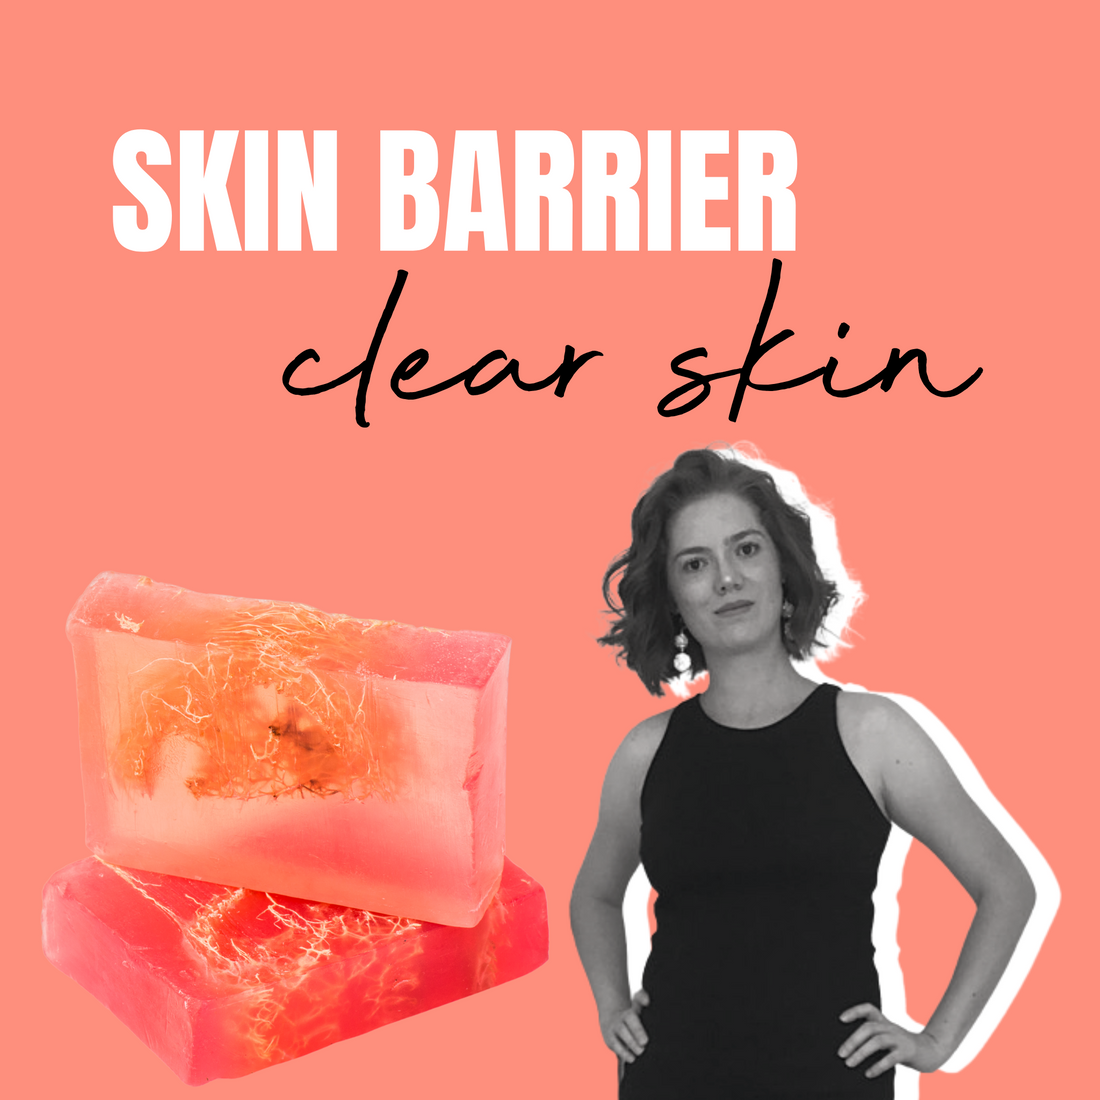 Healthy skin barrier for clear skin